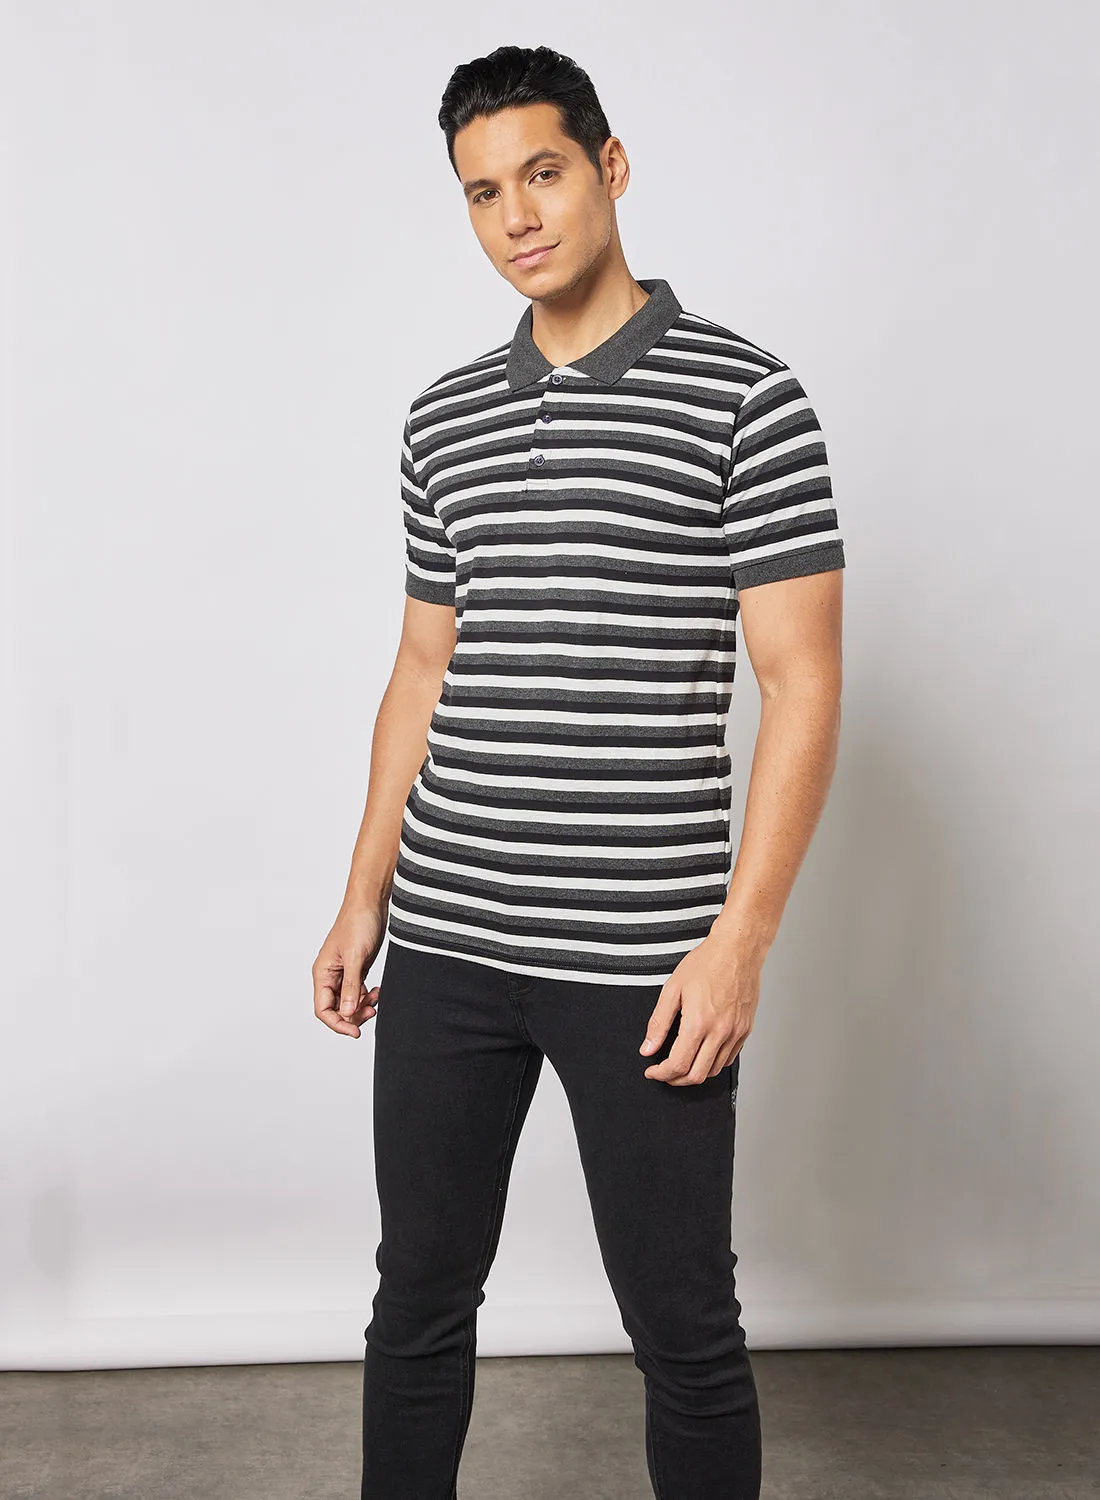 Noon East Men's Basic Casual Polo Printed Cotton T-Shirt in Regular Fit Half Sleeves Black